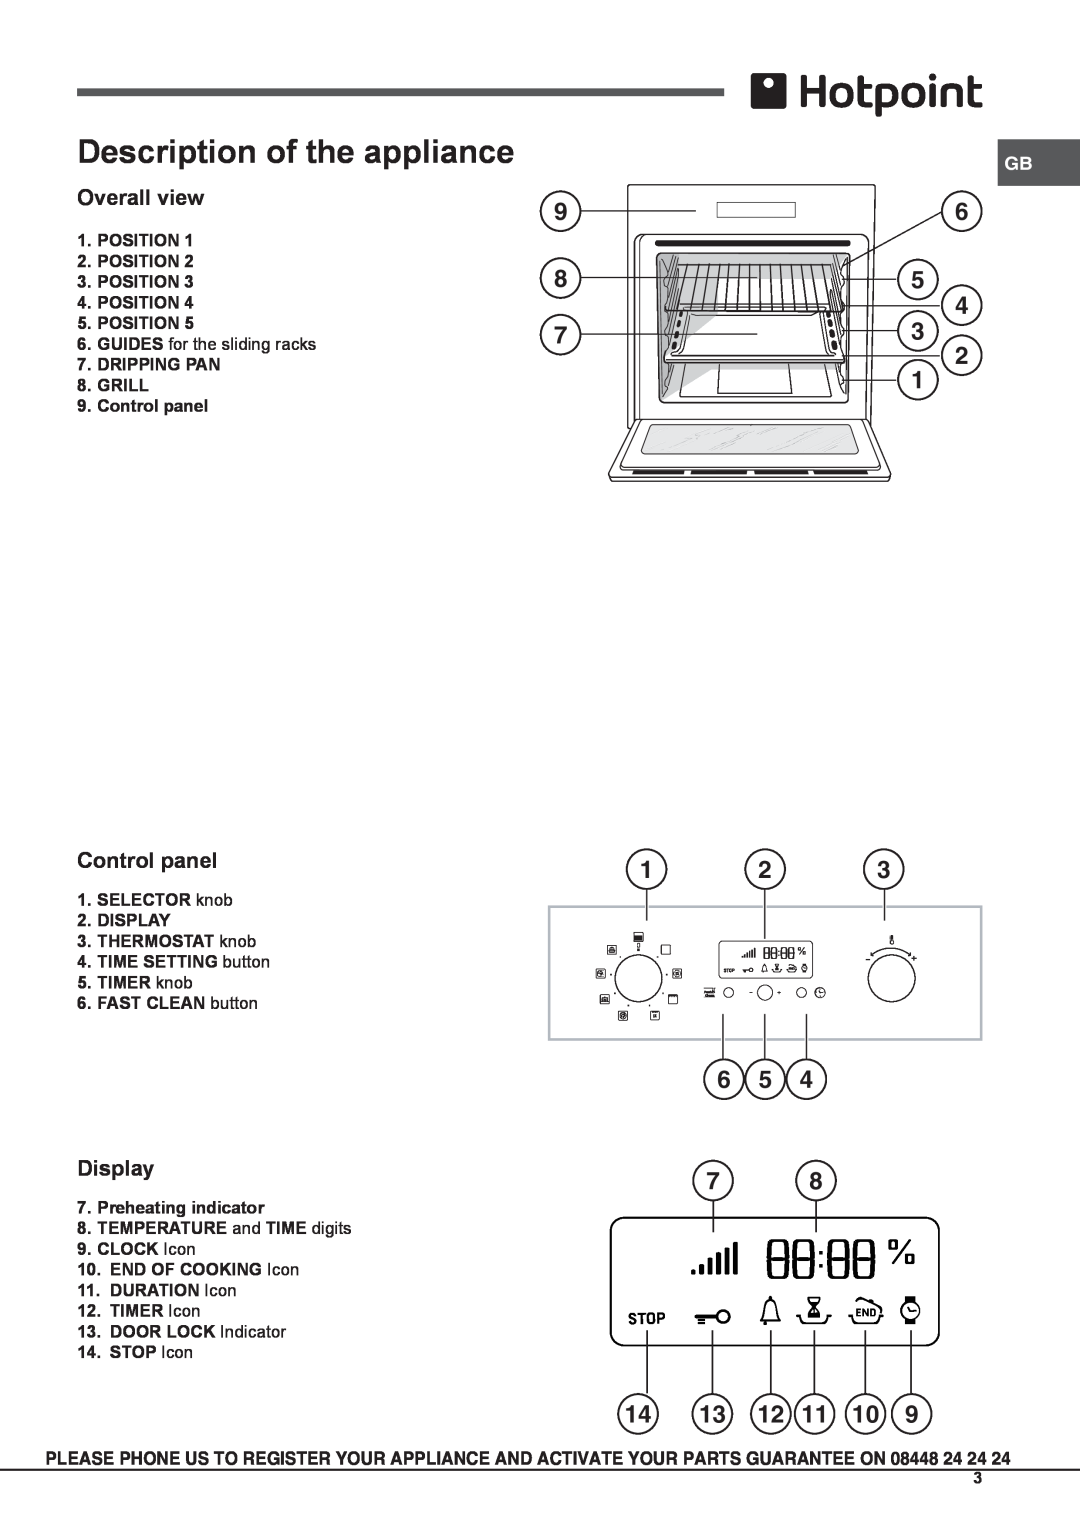 Hotpoint SH89PX S, KSOS 89 PX S manual Description of the appliance, 14 13 12 11 10, Overall view, Control panel, Display 